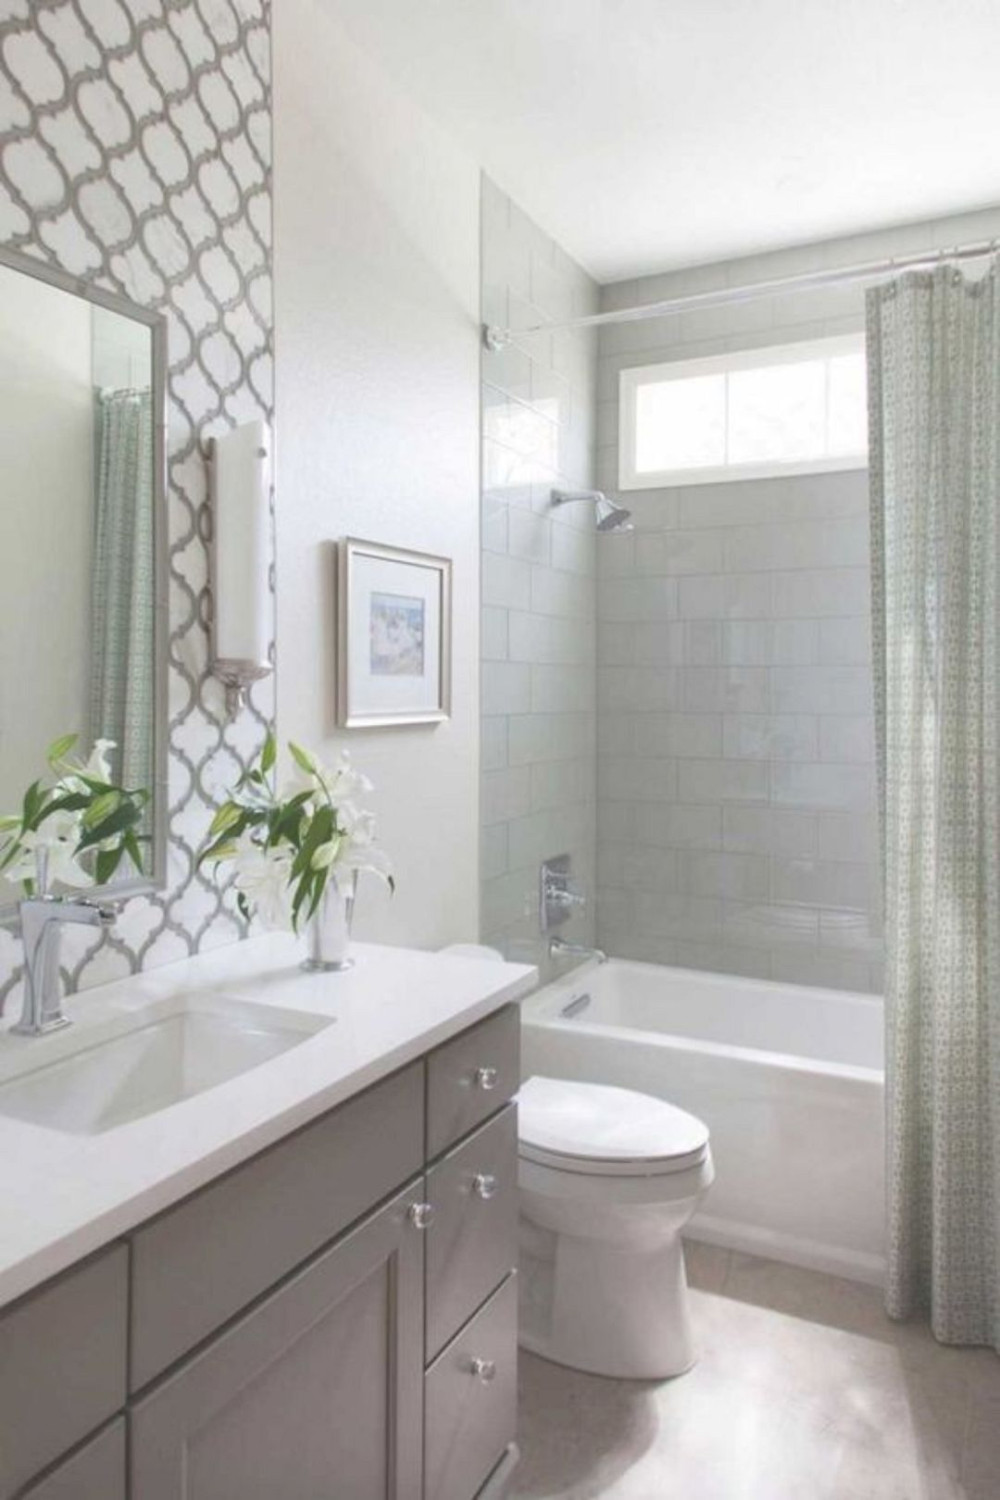 On-A-Budget Small Bathroom Design Ideas to Inspire You  Small